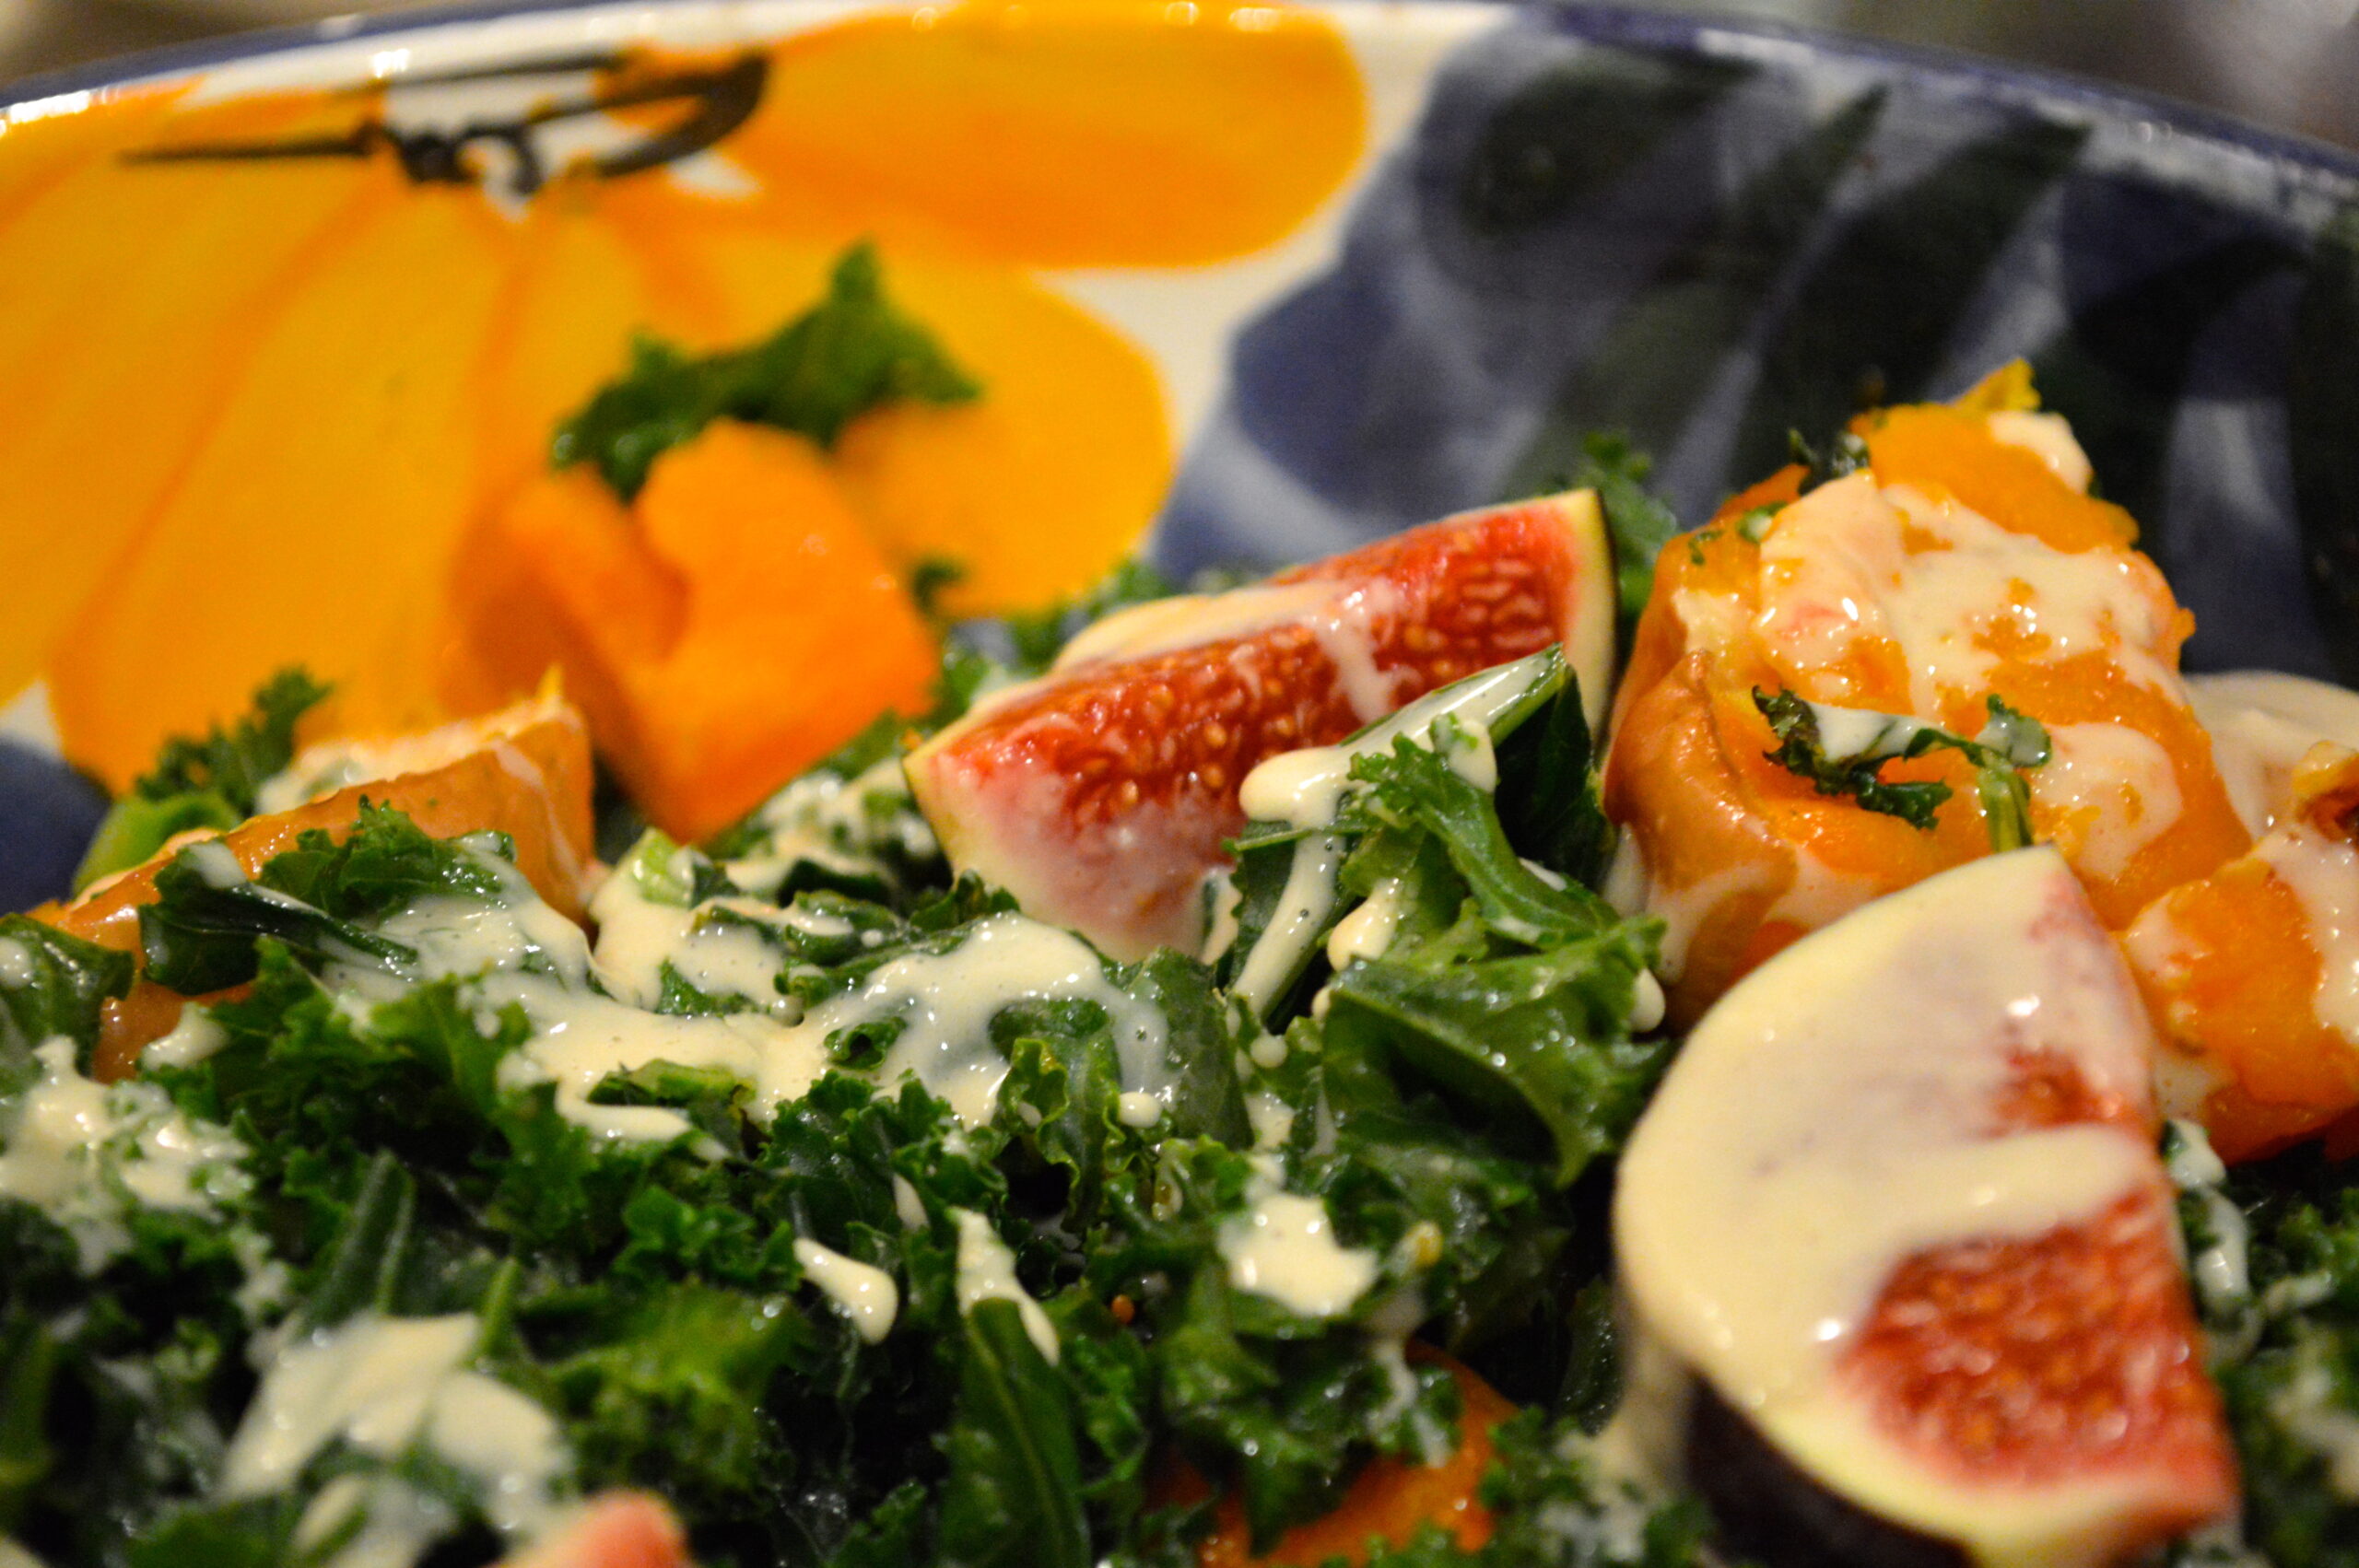 Warm kale, fig and butternut squash salad with a tahini dressing